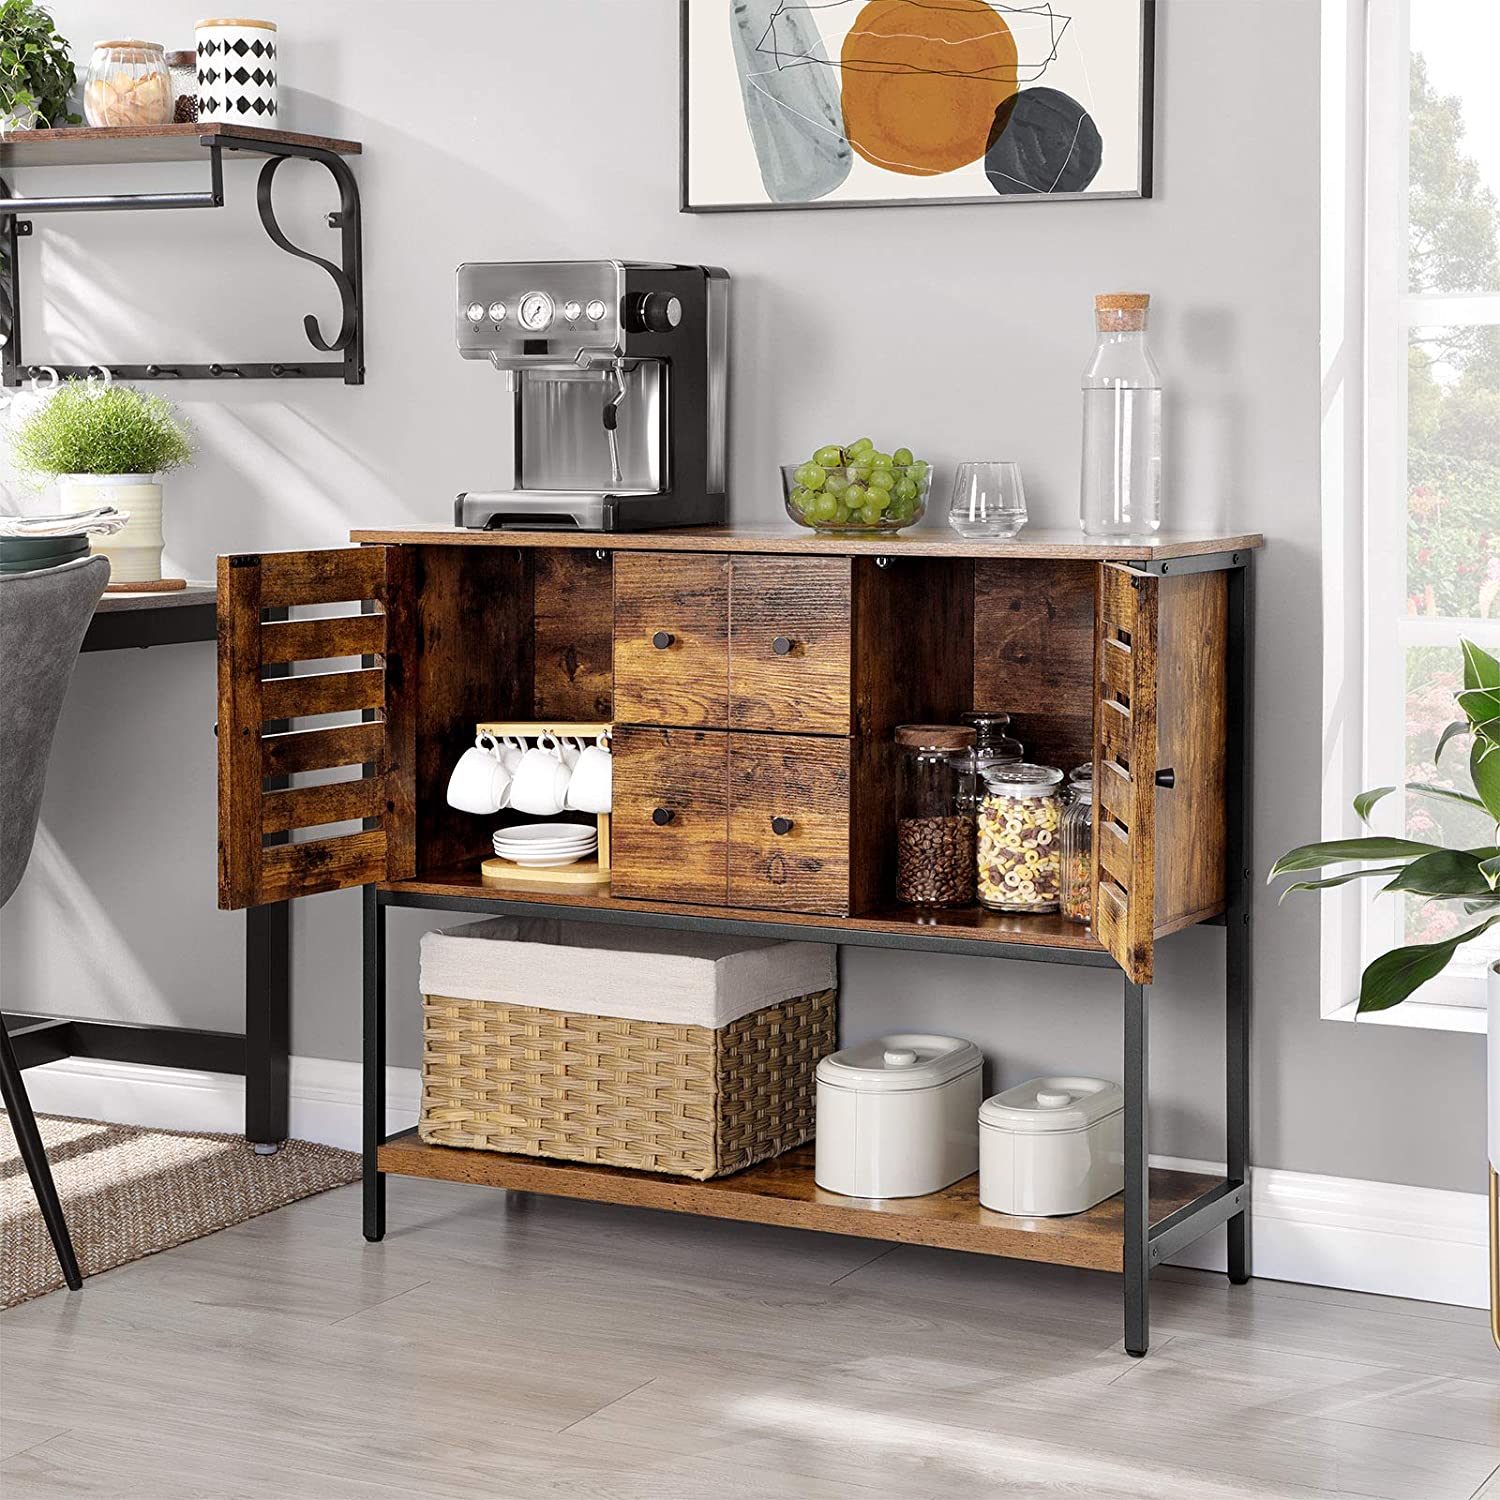 Nancy's Tilburry Storage Cabinet - Chest of Drawers - Industrial Cabinet - Dresser - Cabinet with 6 Drawers - 100 x 35 x 84.5 cm (L x W x H)